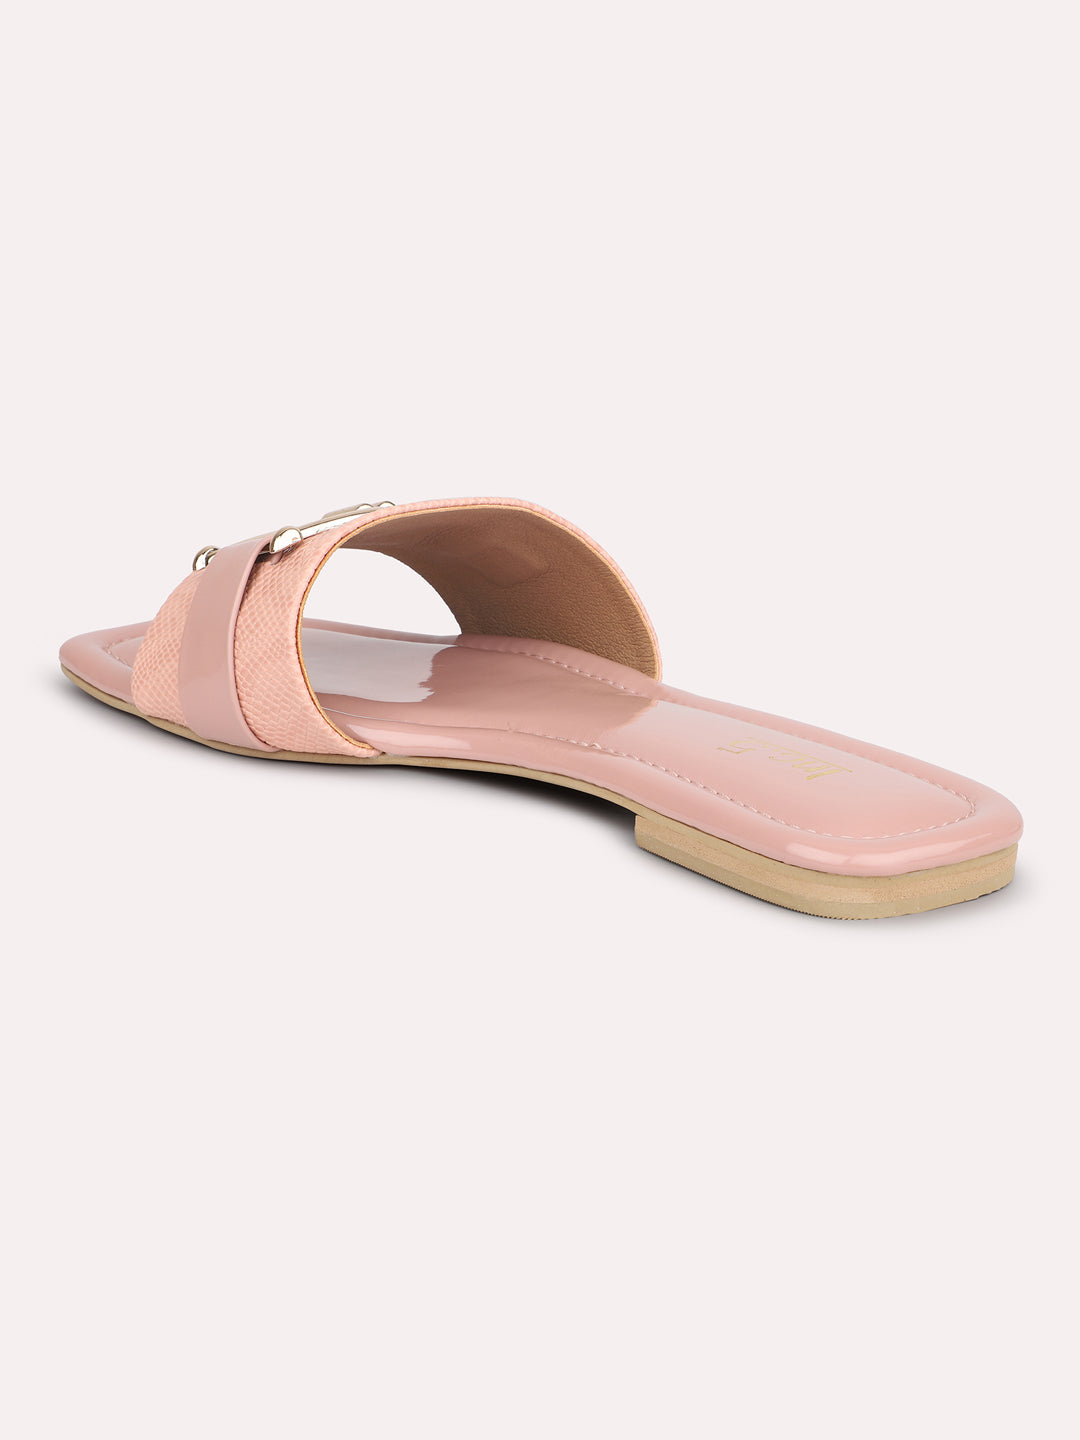 Women Peach-Coloured And Gold-Toned Buckled Open Toe Flats